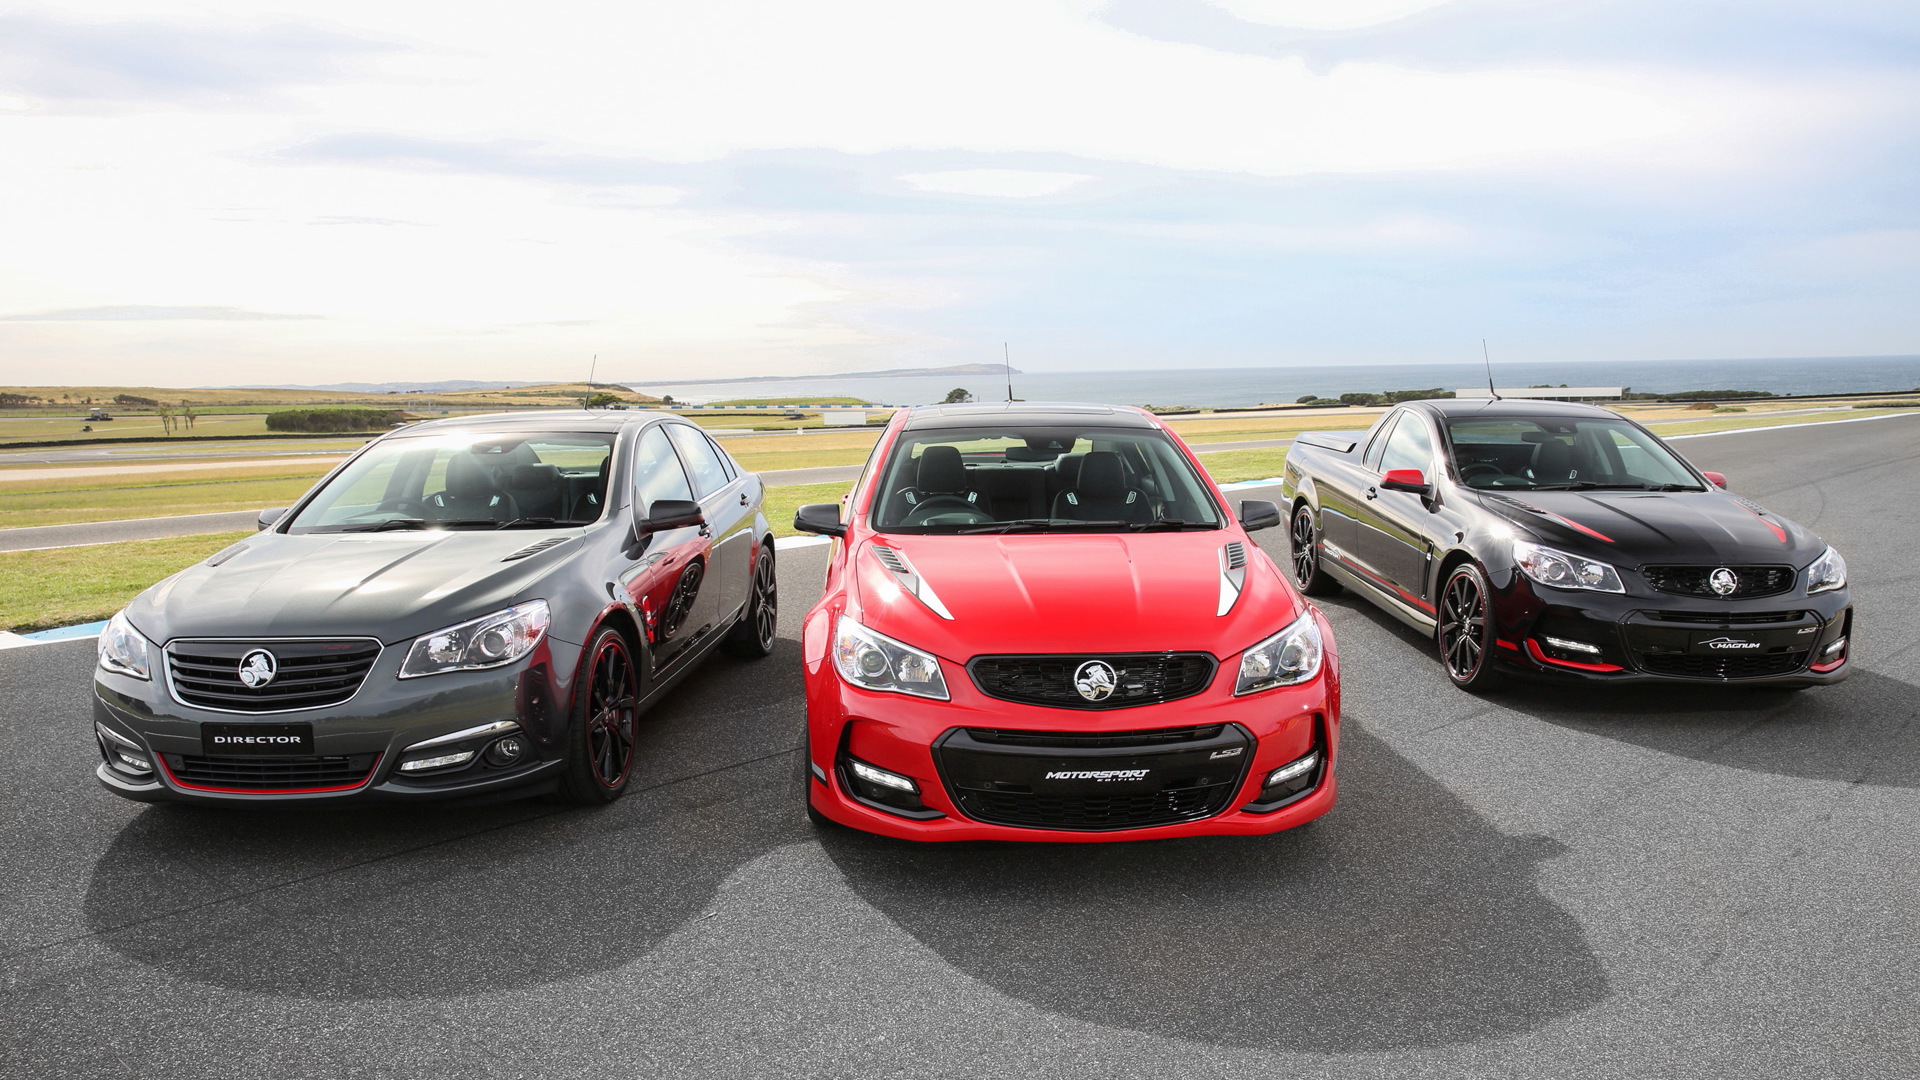 2017 Holden Commodore Motorsport, Director and Magnum special editions